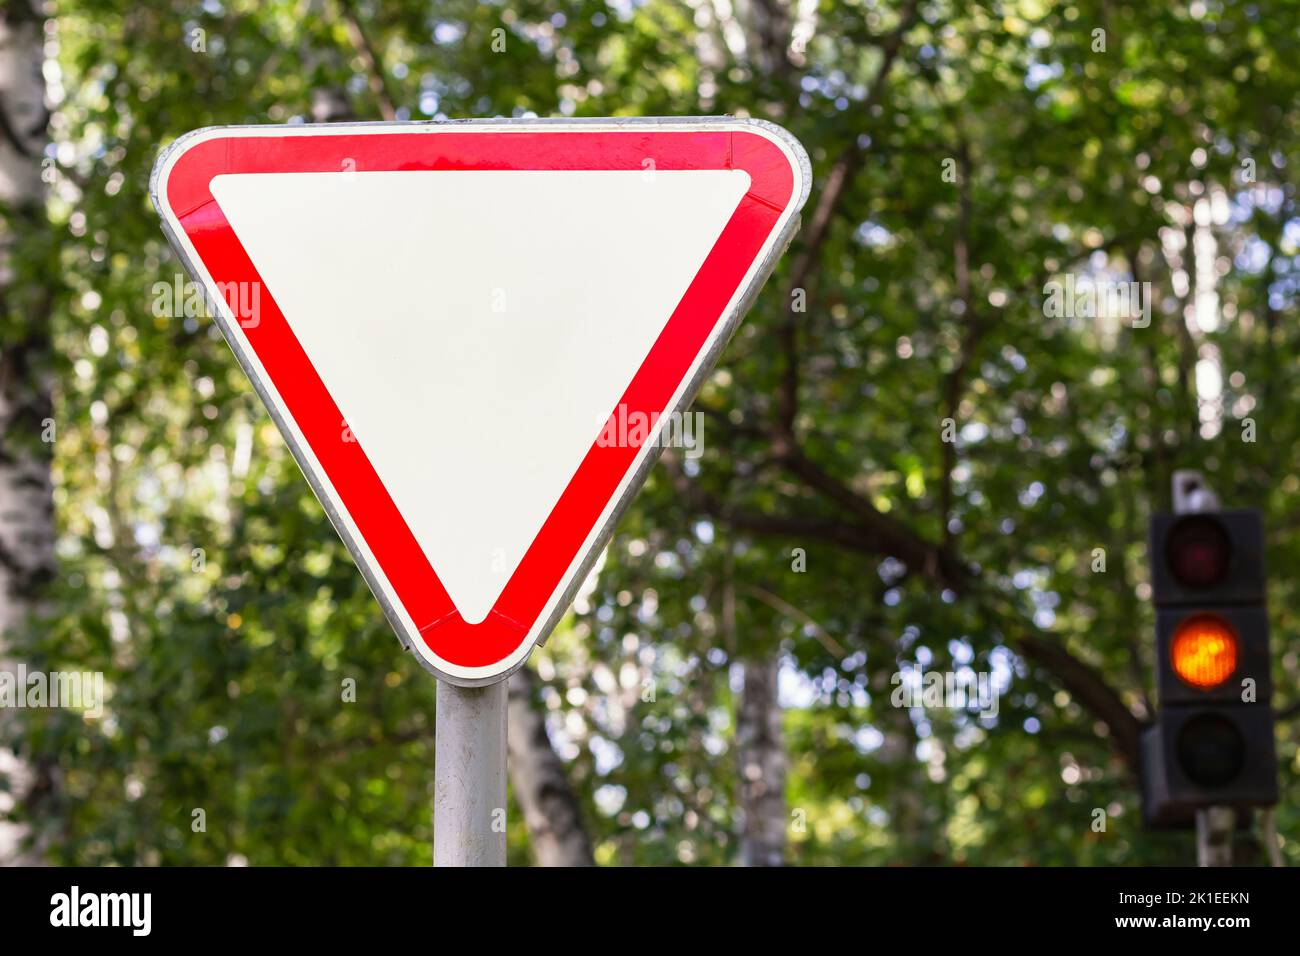 Russian road sign give priority to traffic on main road ahead. Give way sign with trees and traffic light in blur in background.Danger warning and sto Stock Photo